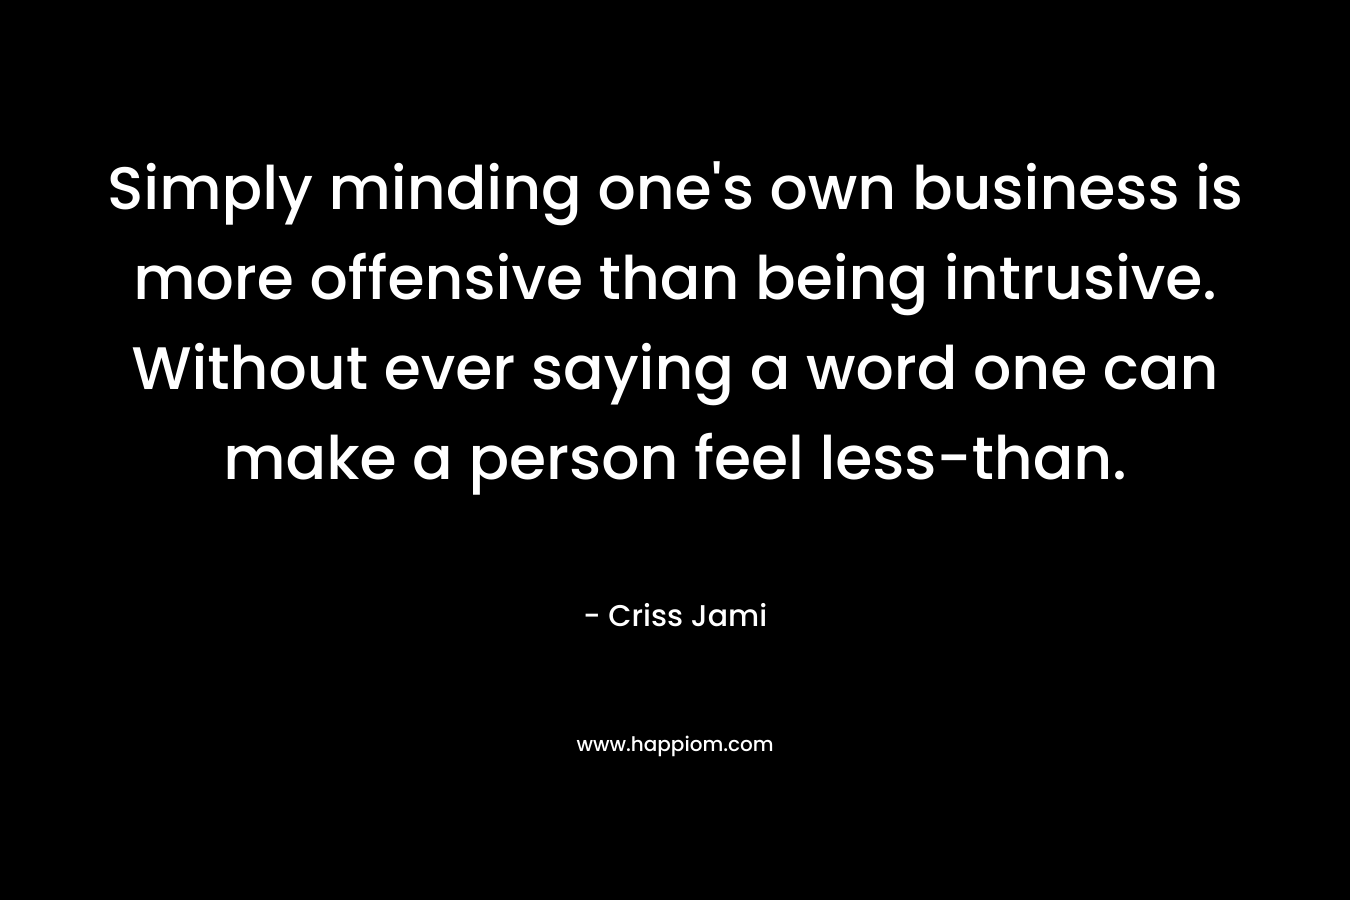 Simply minding one's own business is more offensive than being intrusive. Without ever saying a word one can make a person feel less-than.